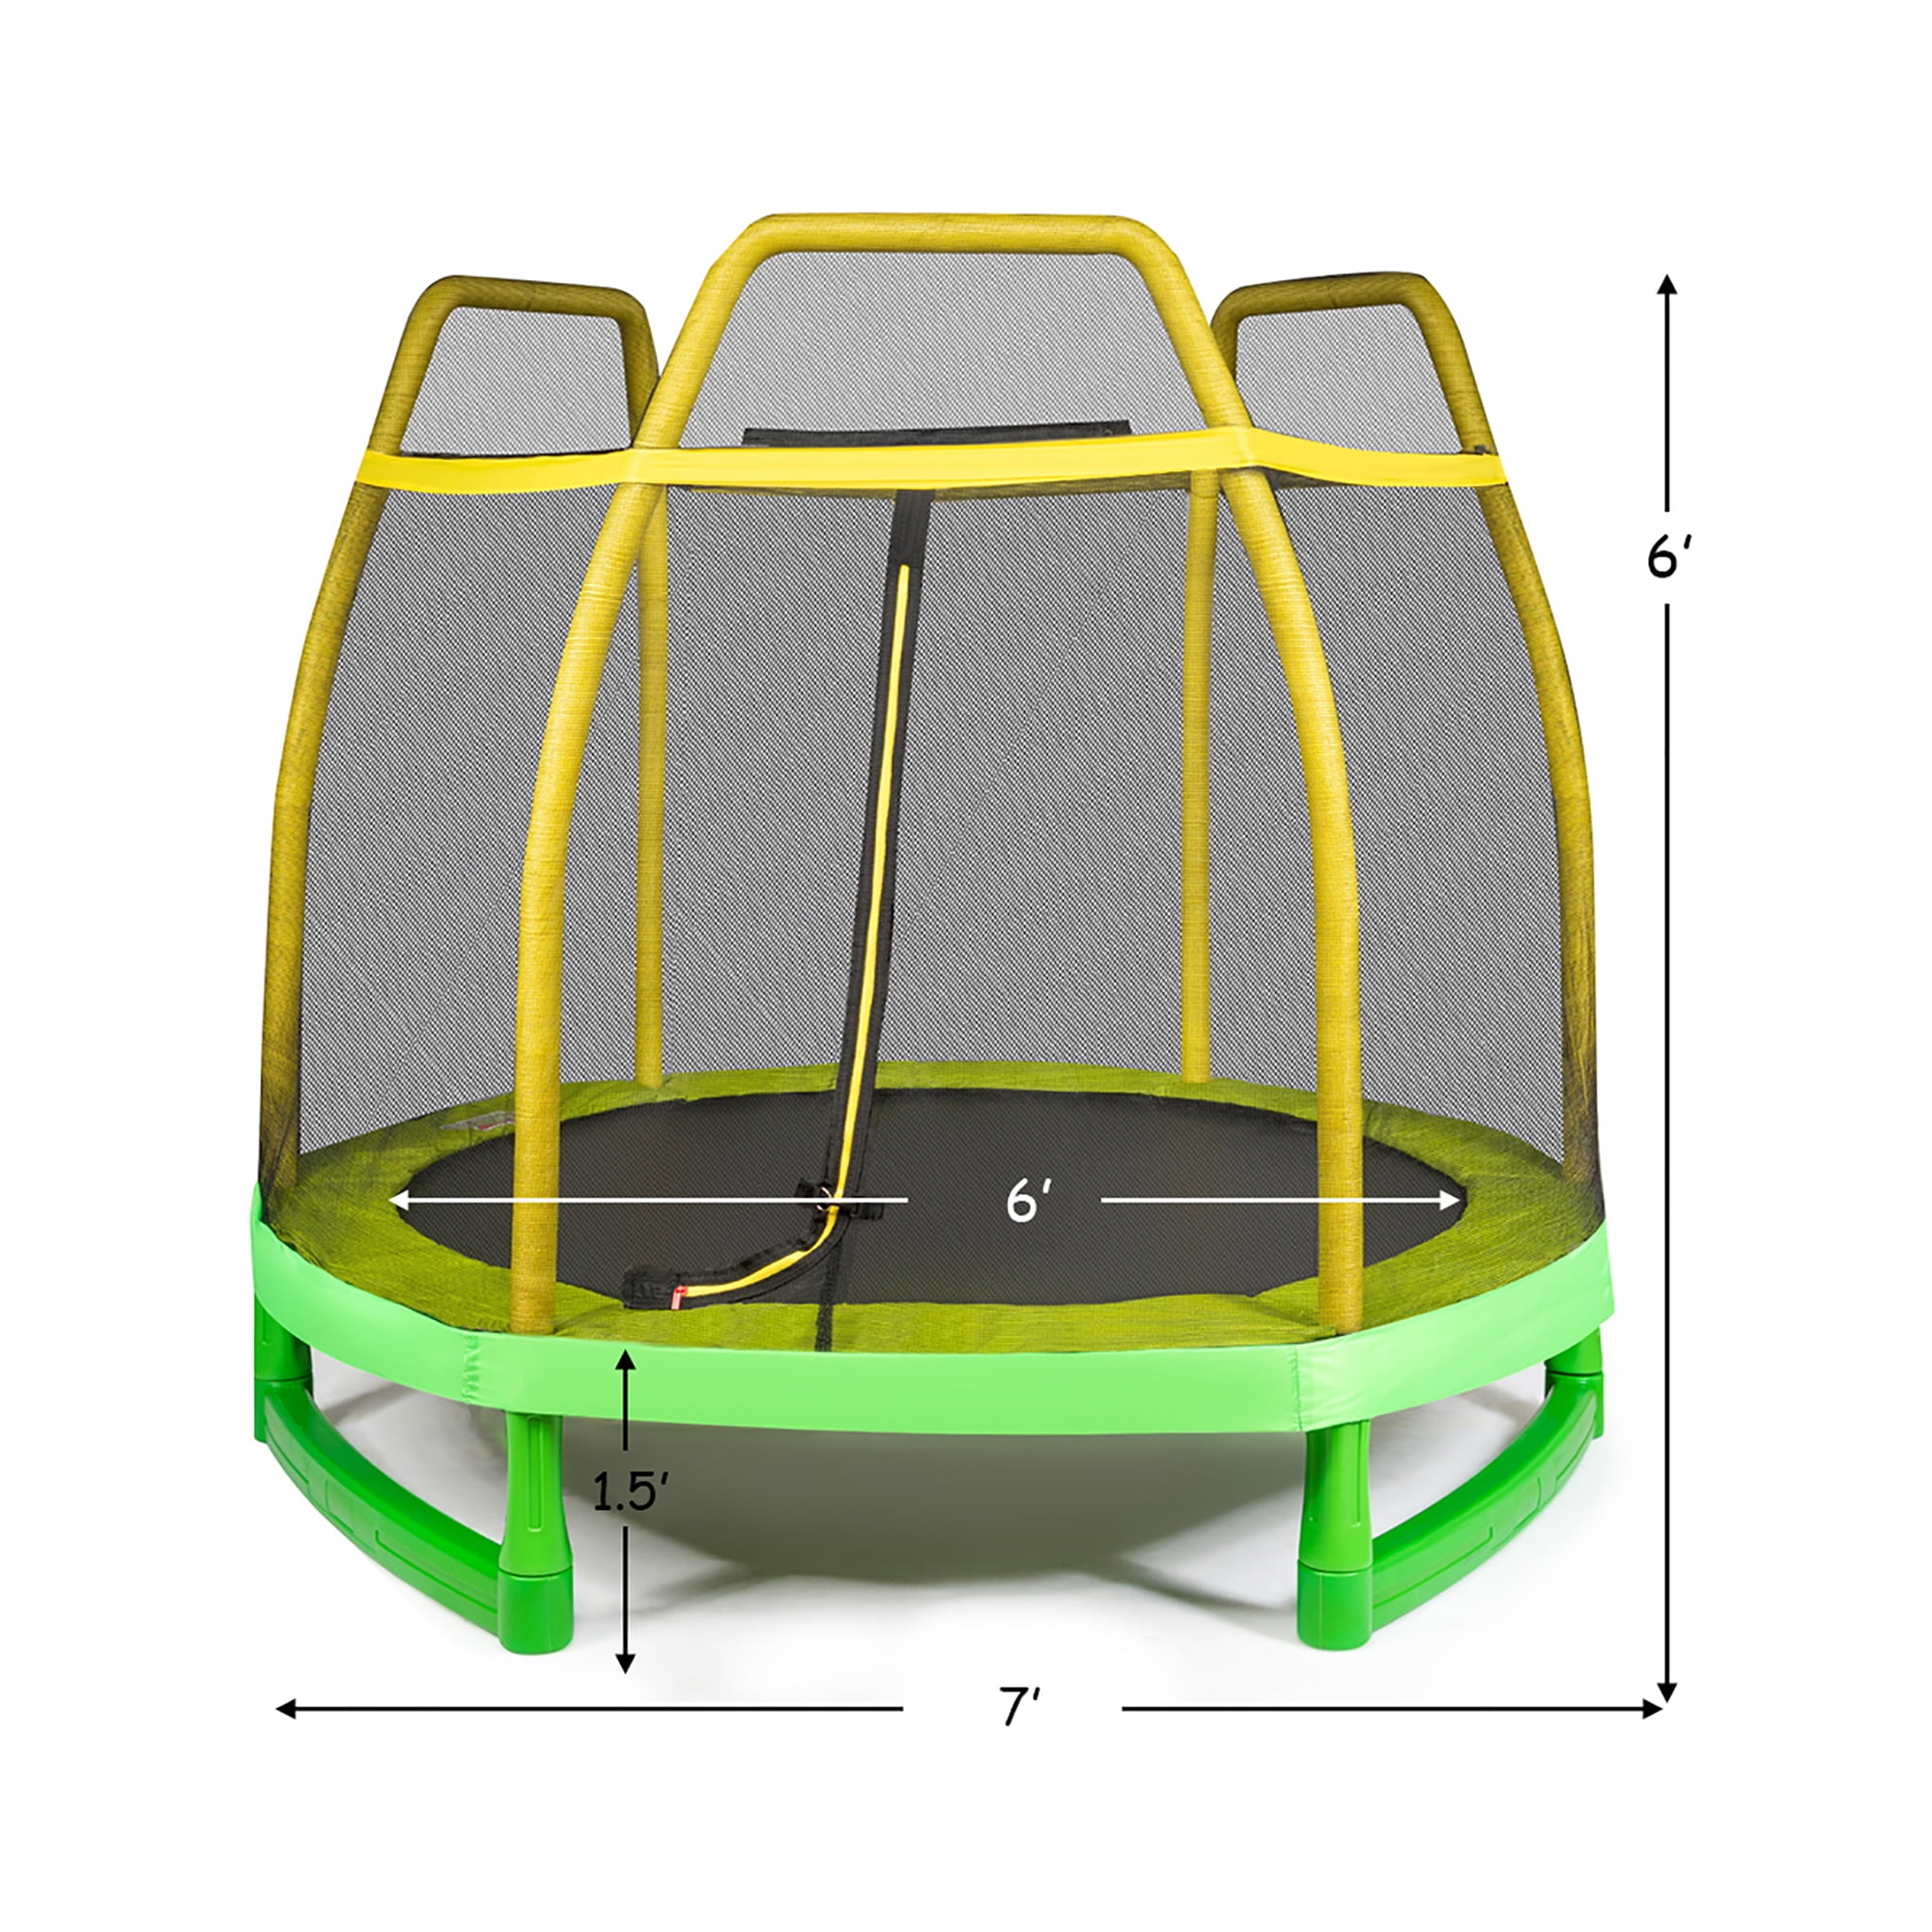 Mini Indoor/Outdoor Round Bounce Jumper 84 Great Gift for Kids Clevr 7ft Kids Trampoline with Safety Enclosure Net & Spring Pad Built-in Zipper Heavy Duty Steel Frame 